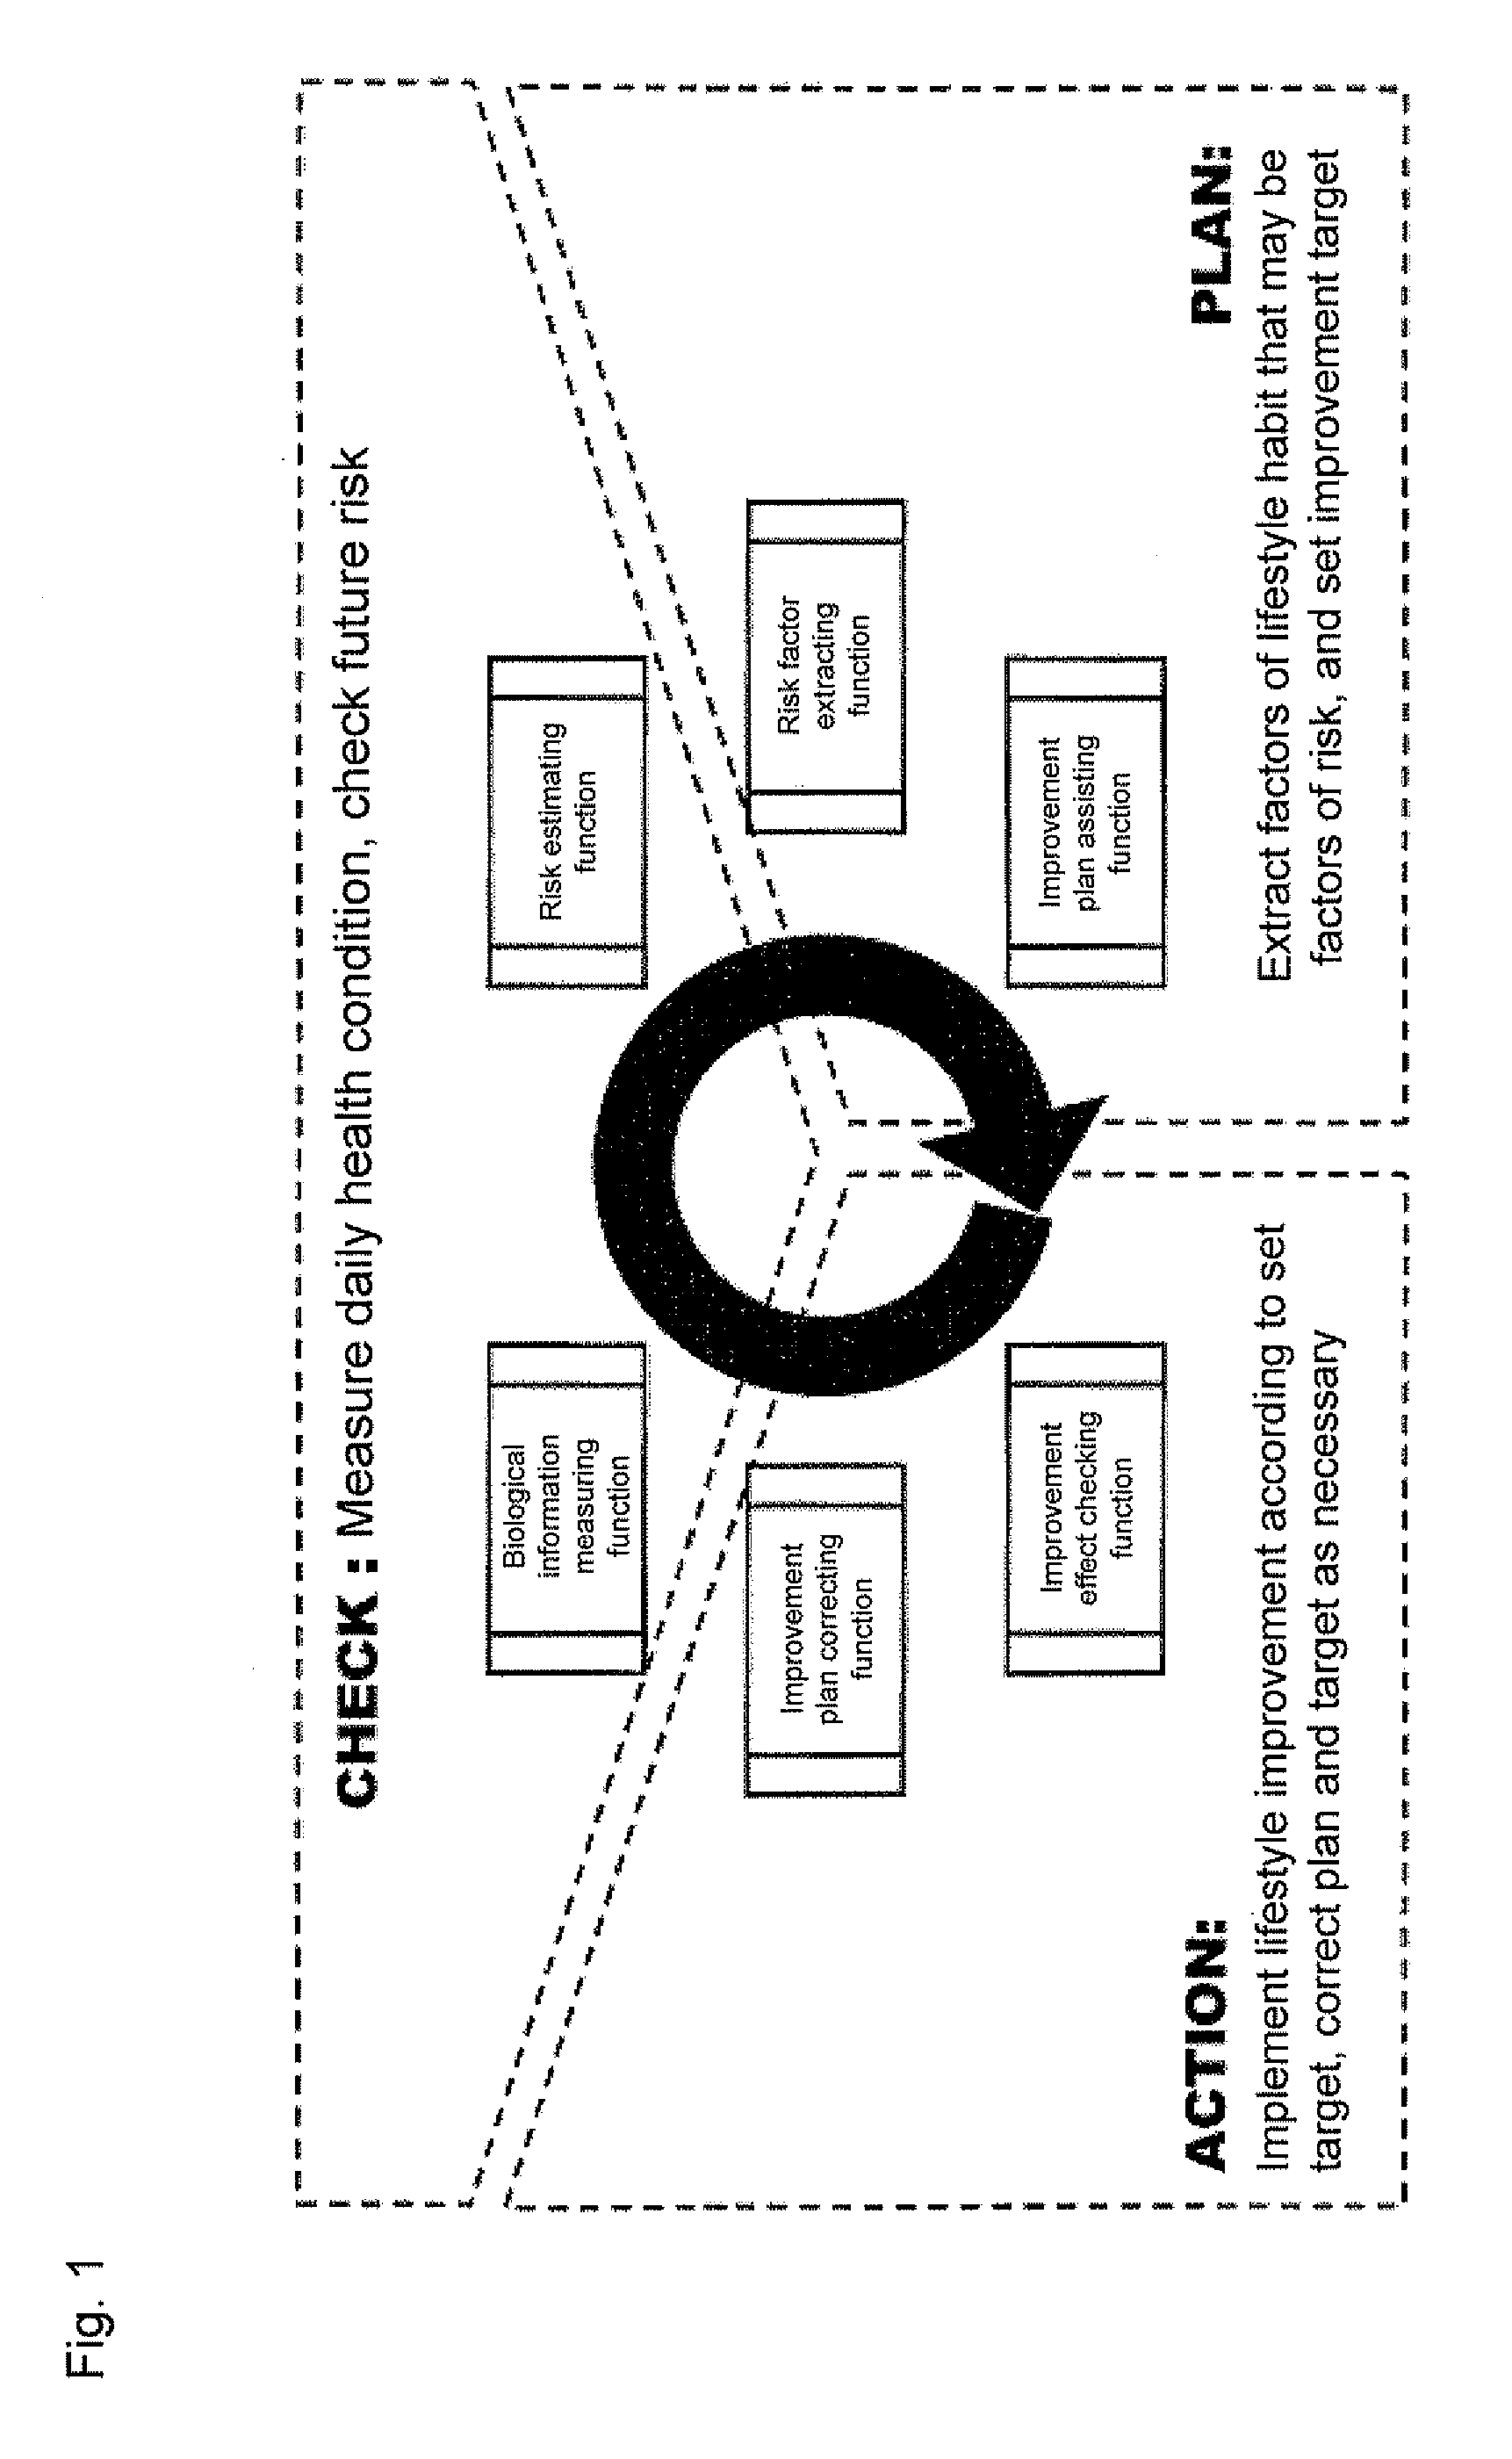 Health condition determining device